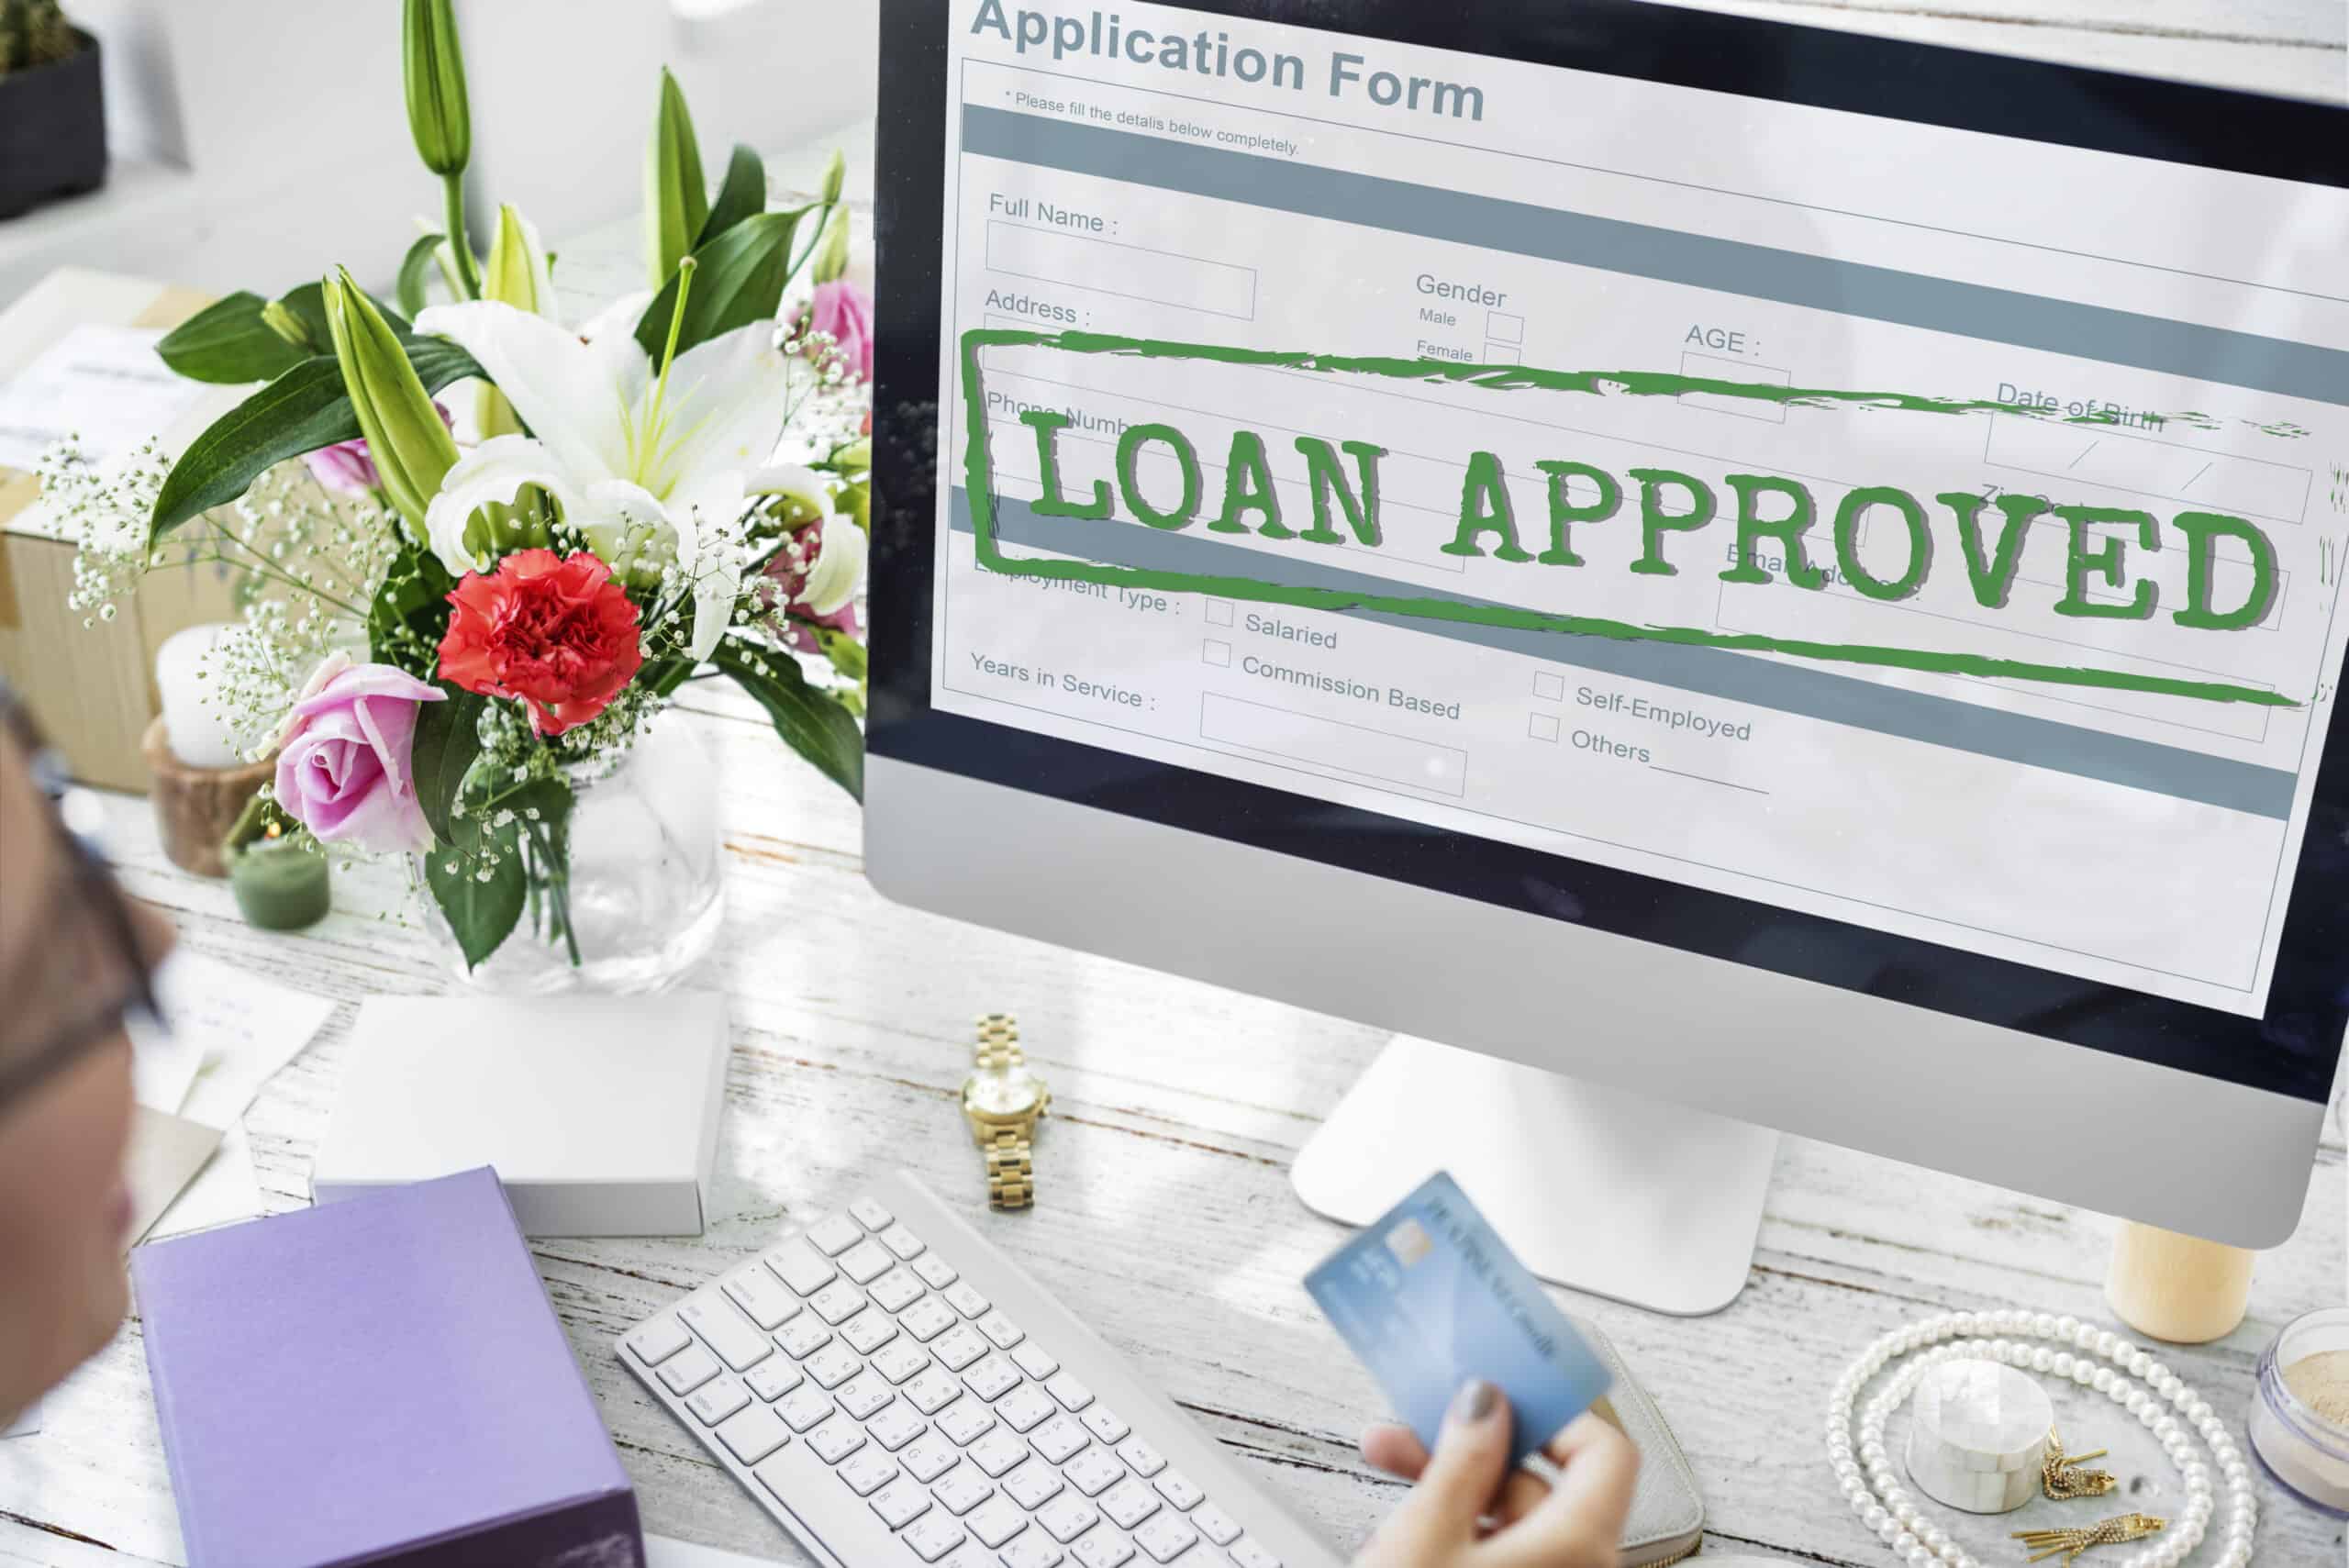 Legal Documents Needed for a Personal Loan Application in the UK